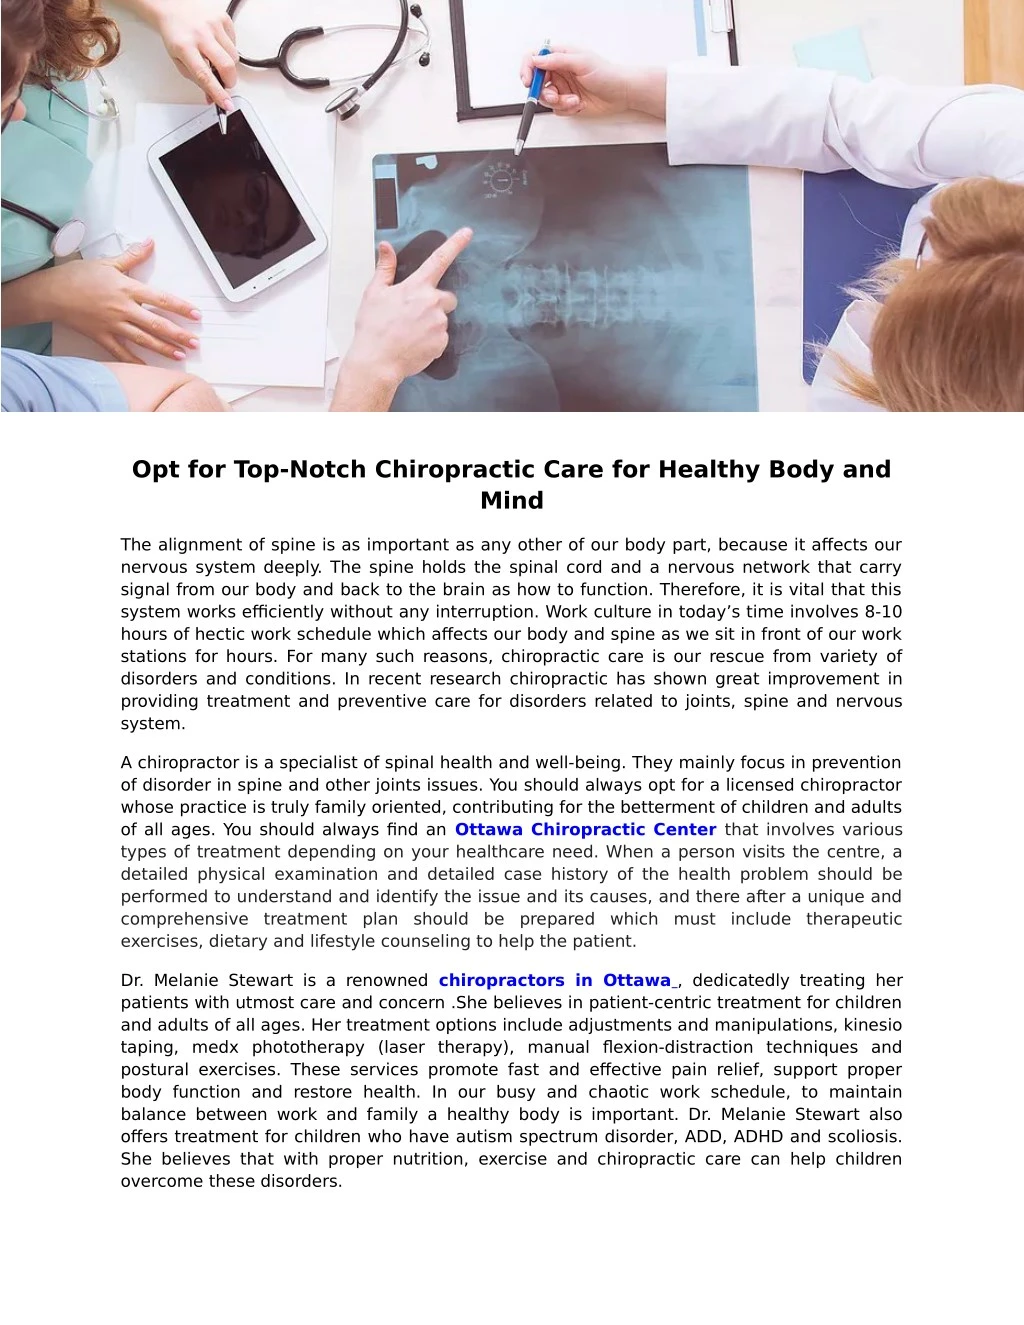 opt for top notch chiropractic care for healthy